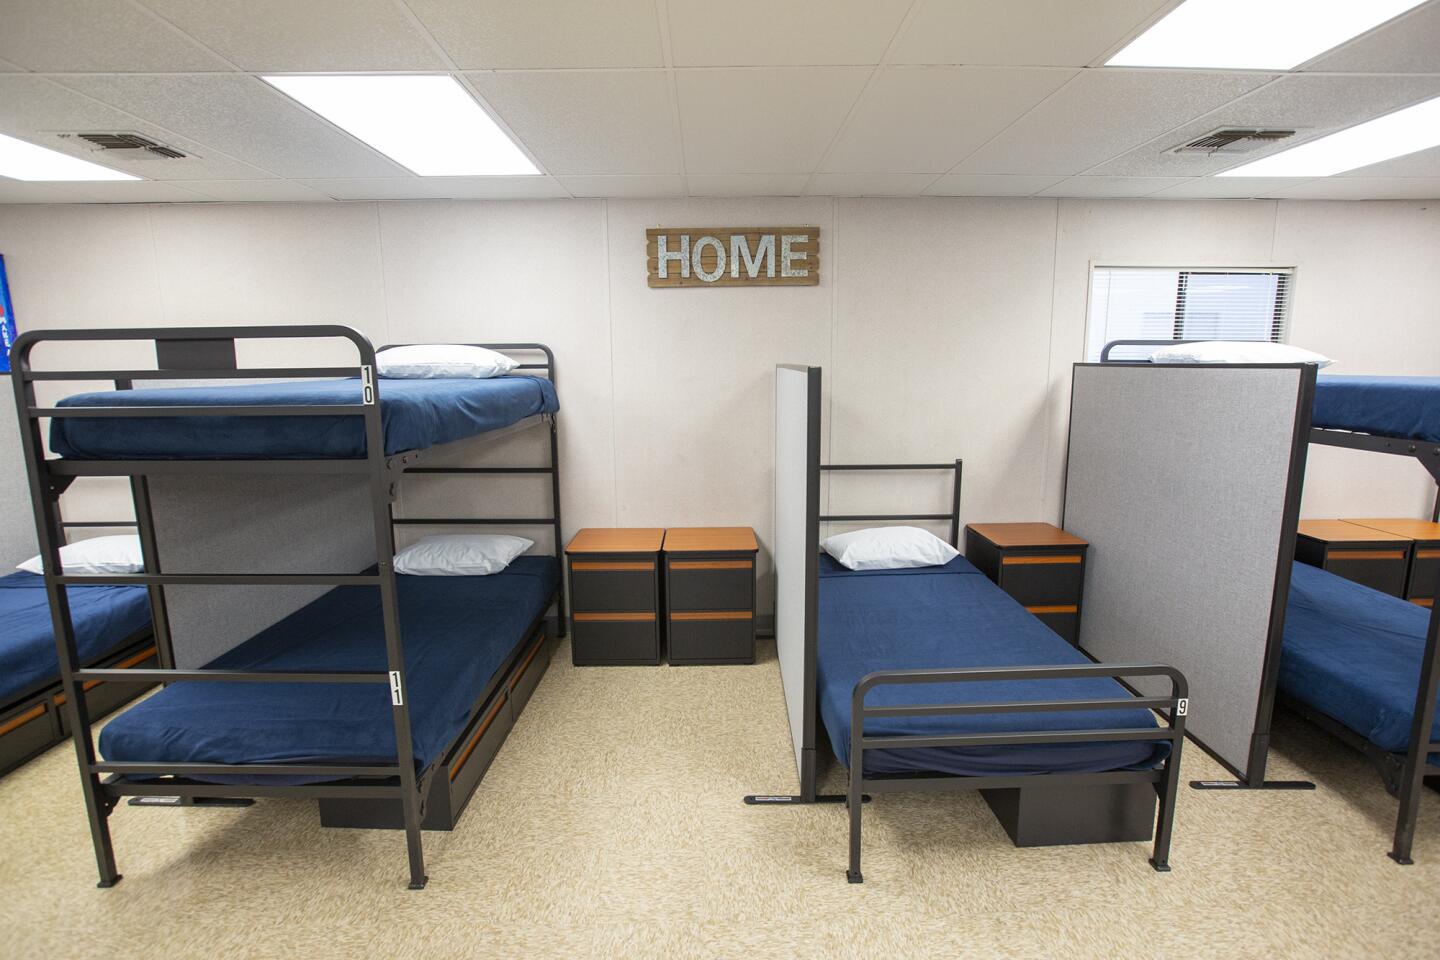 New beds are available in a sleeping are at the Anaheim emergency shelter at 1340 S. Lewis Street.